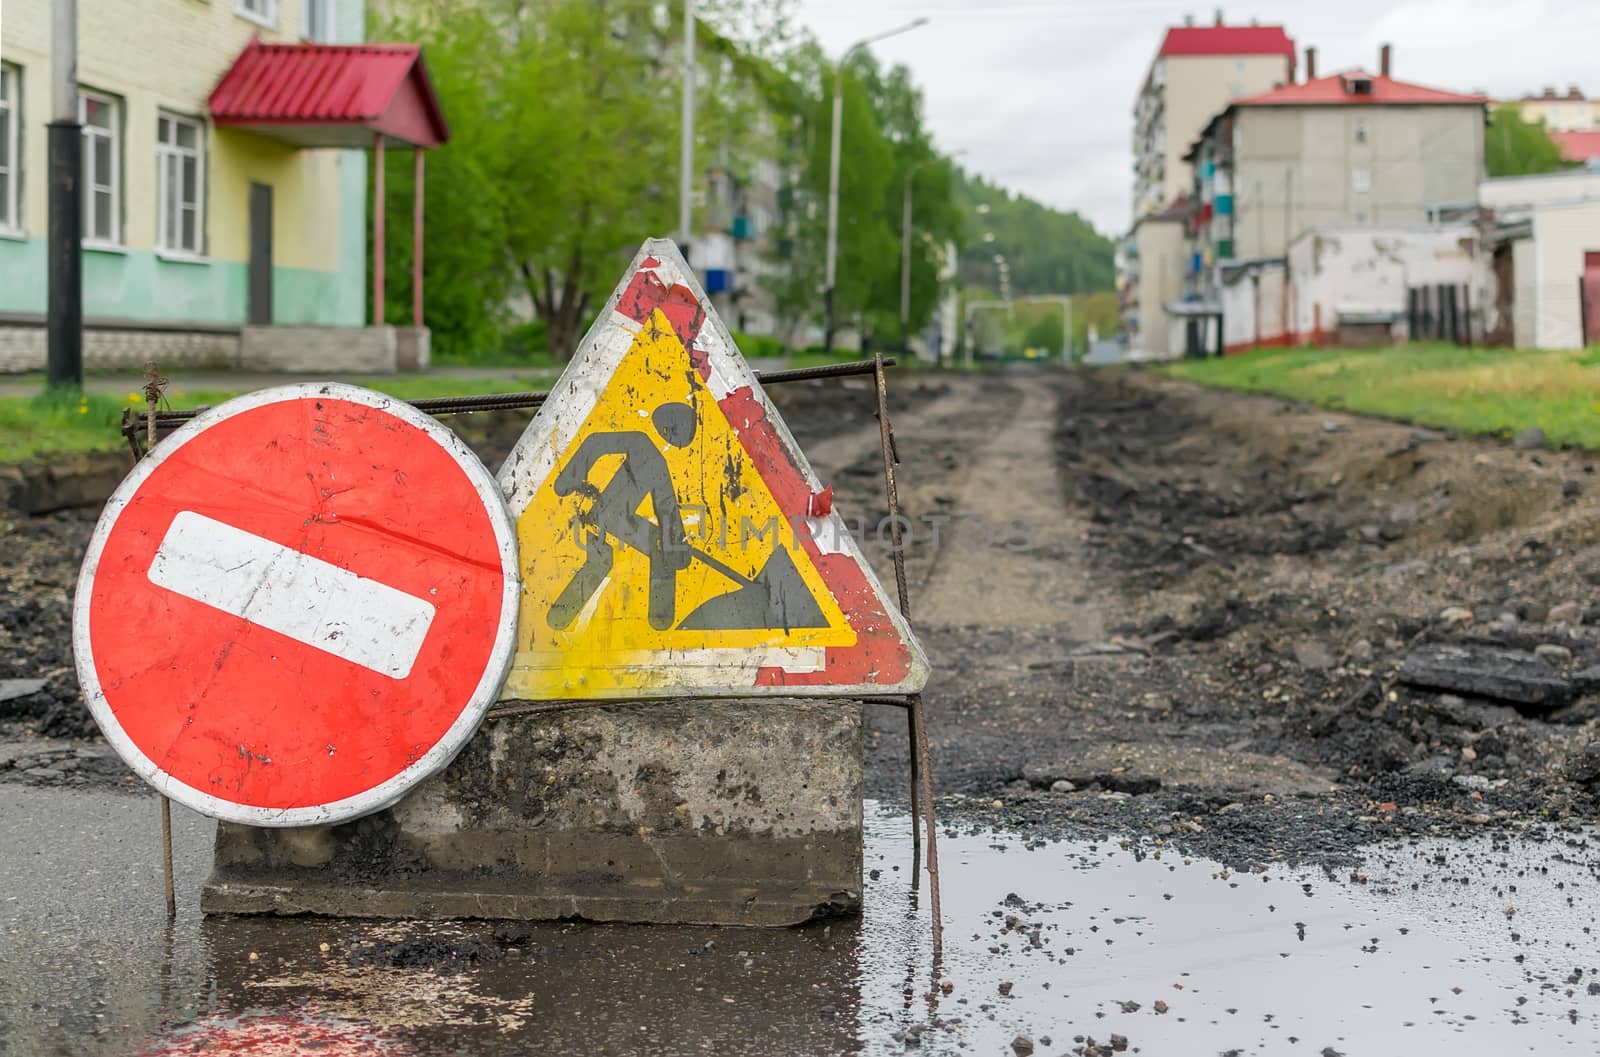 road sign, detour, road repair on the background of the road and broken asphalt covering on the urban street